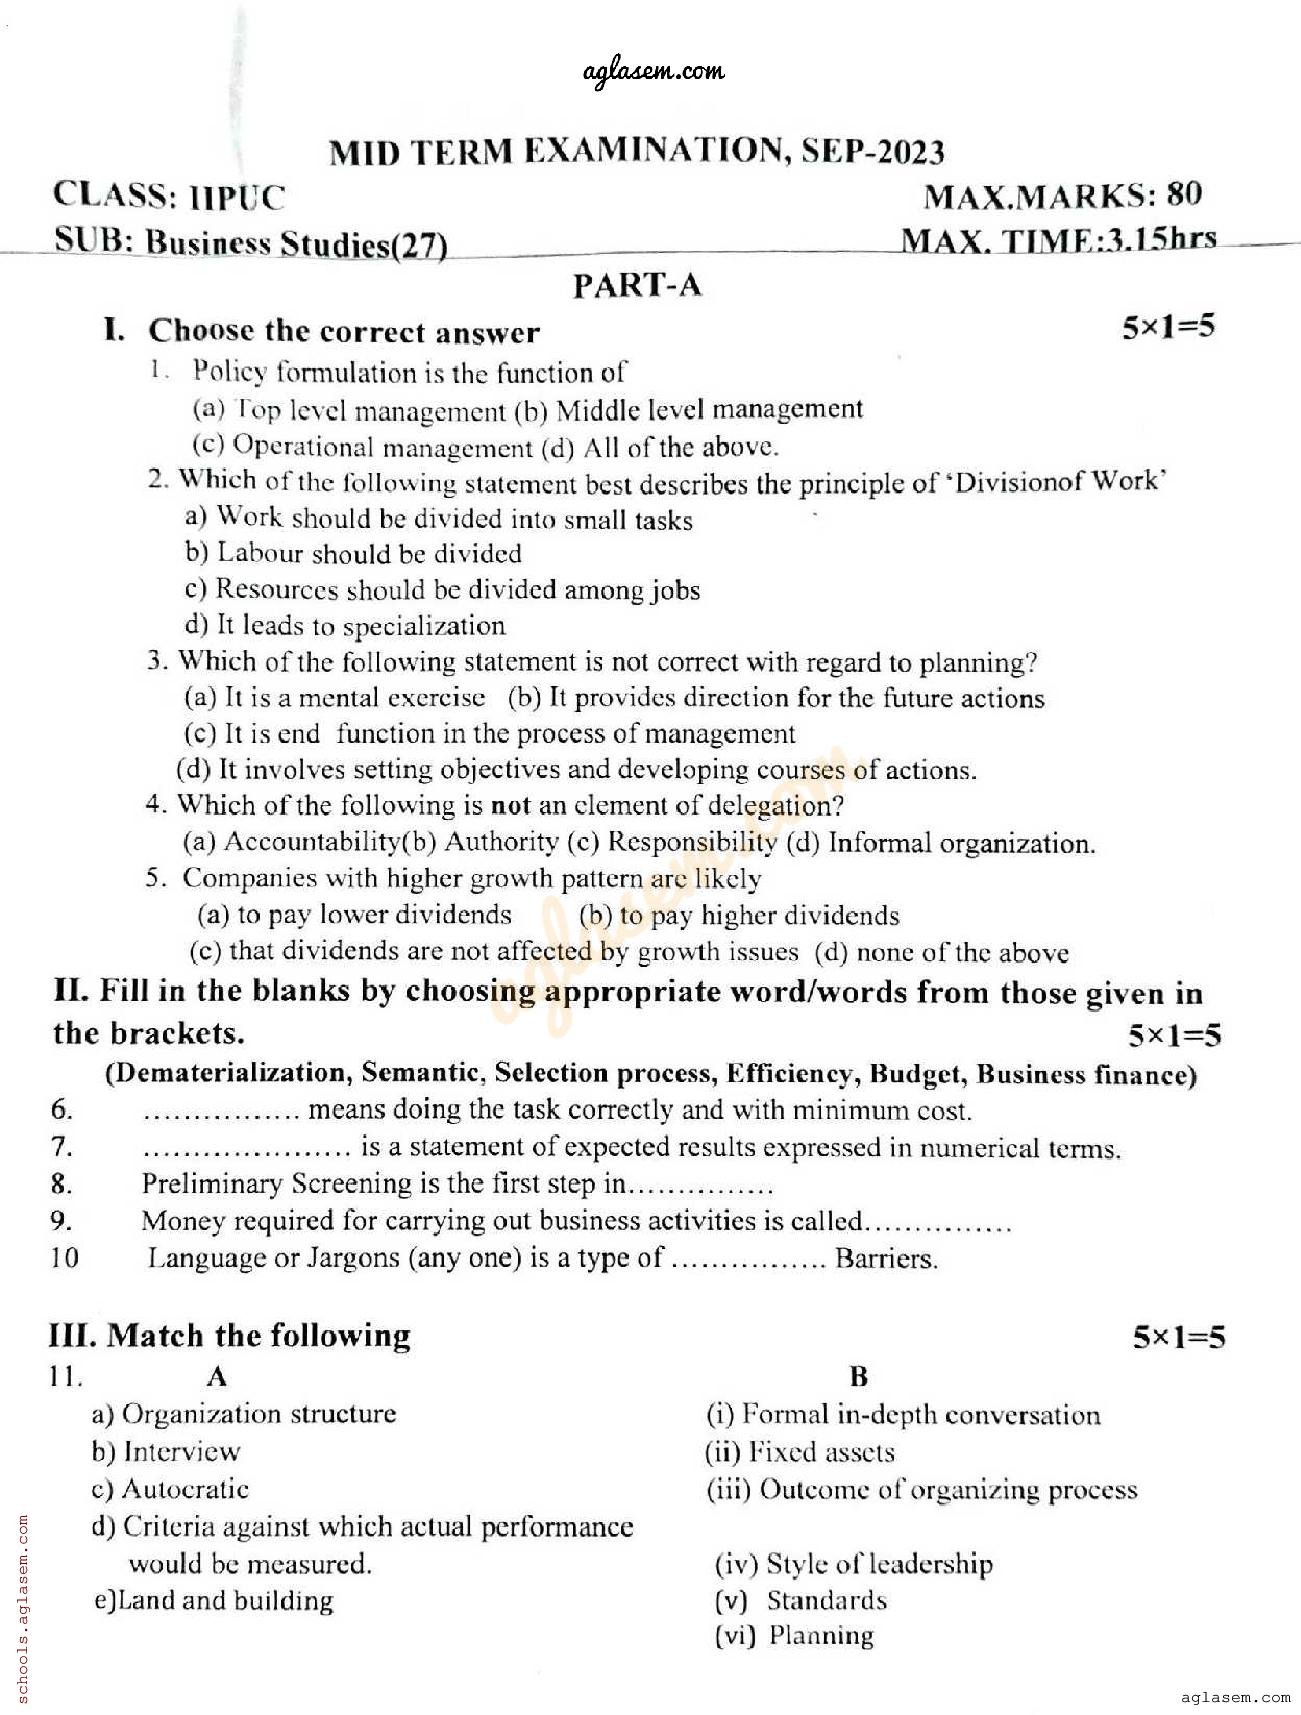 Karnataka 2nd PUC Mid Term Question Paper 2023 Business Studies - Page 1